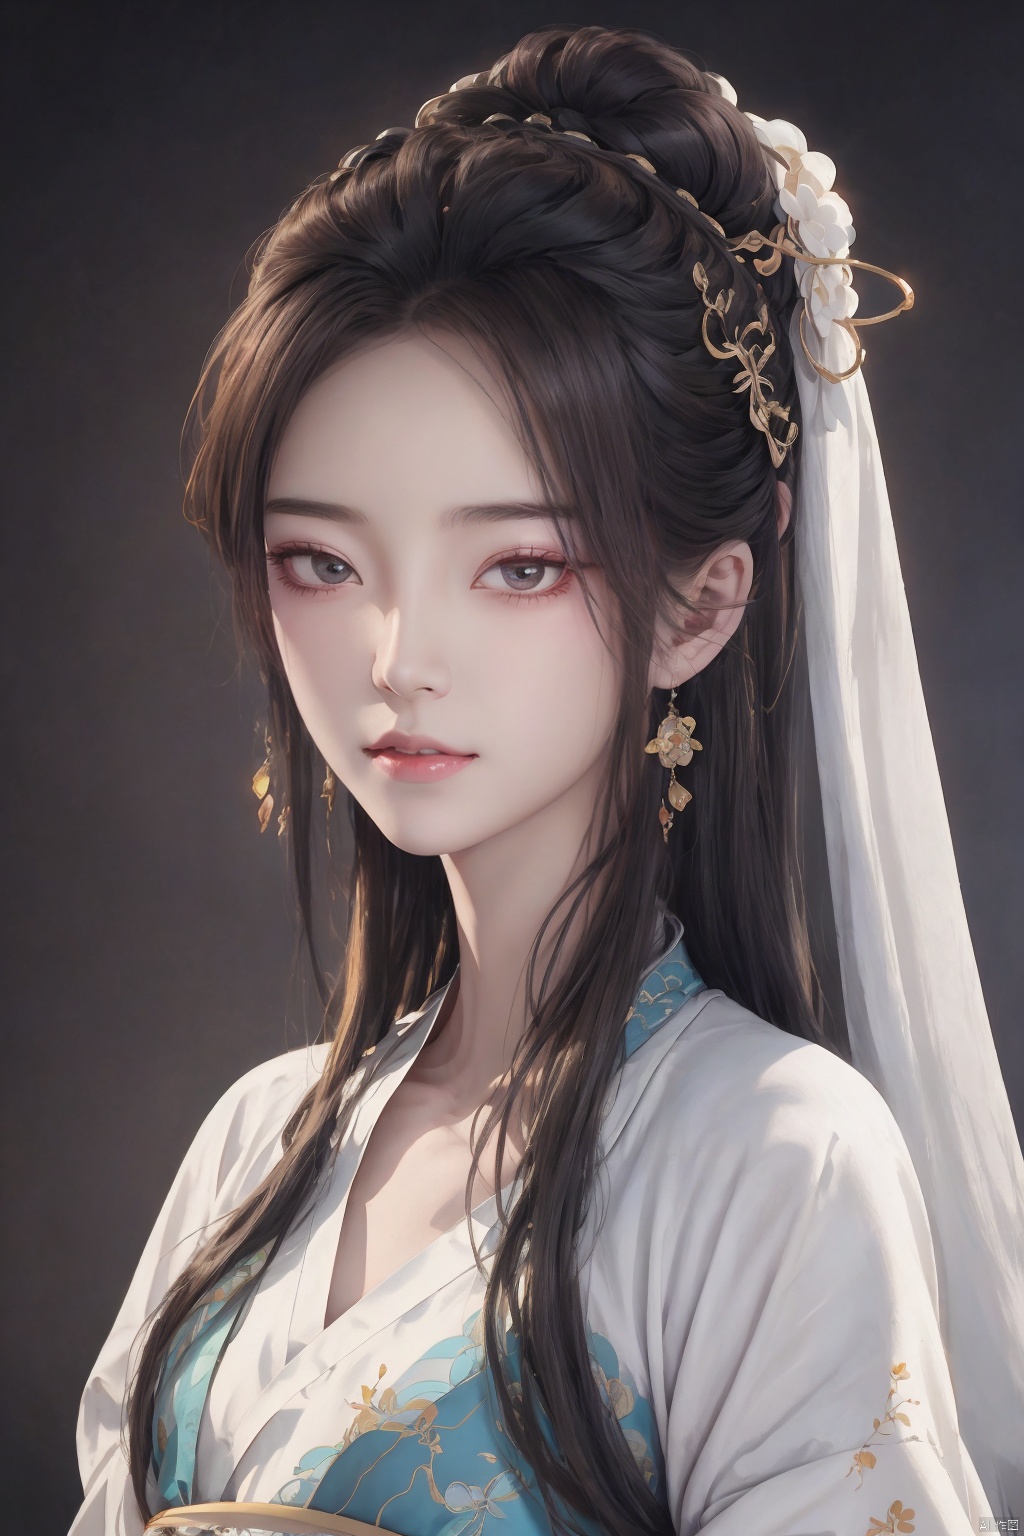  A mesmerizing and visually stunning artwork featuring a single female figure, created by a renowned artist, showcasing intricate details and vibrant colors. Official art quality with a strong aesthetic appeal. High resolution rendering in 4K, huliya, 1girl,White hanfu,
,Gemstones, ornaments, flash, diffusion, juemei,Textured skin,Textured hair,smile